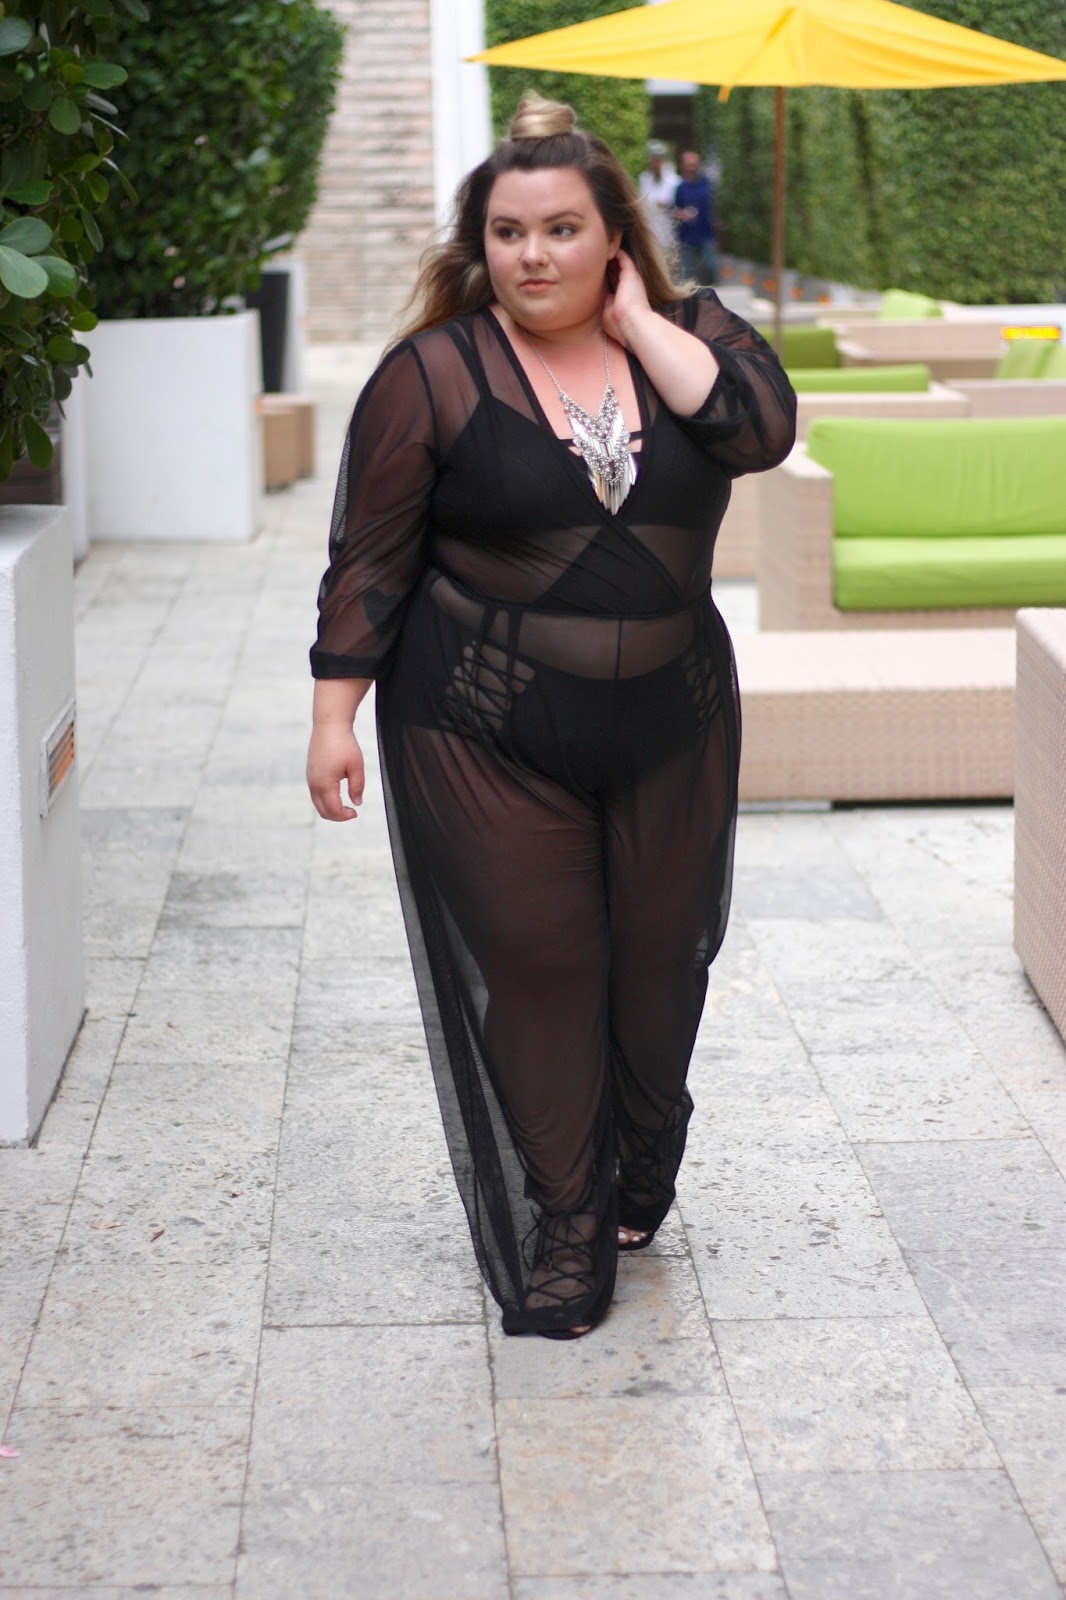 rue 107, rue107, natalie craig, natalie in the city, minnie jumpsuit, see through jumpsuit, mesh jumpsuit, plus size fashion, plus size fashion for women, miami, royal palm south beach, fatshion, curves and confidence, plus size swim cover ups, things to do in miami, collins ave, plus size, plus size swimwear